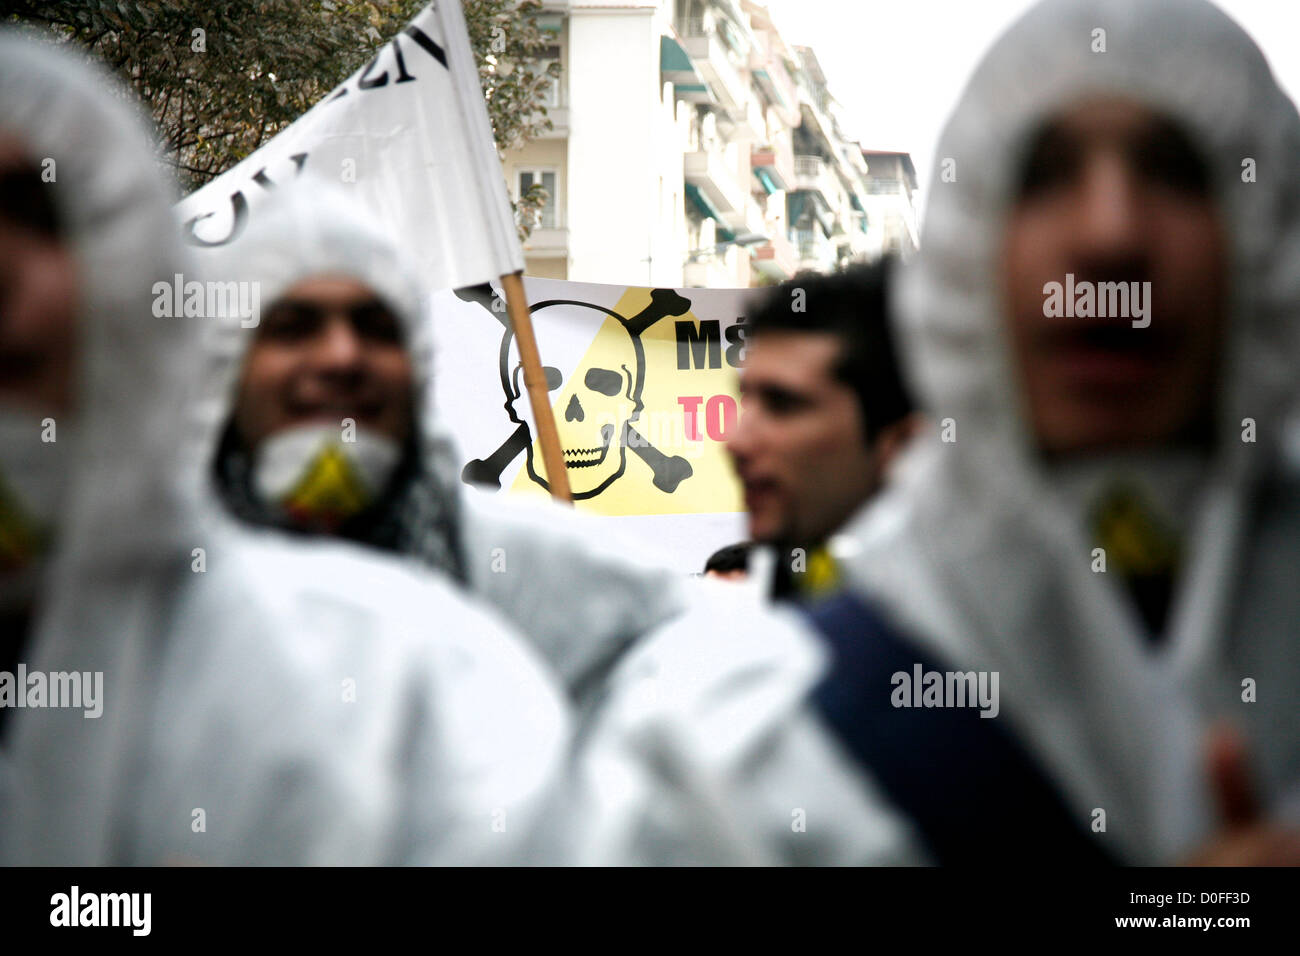 Thessaloniki,Greece. November 24, 2012. Young demonstrators wearing chemical protection suits and shout slogans. Thousands of people flooded the streets of Thessaloniki to protest against efforts by Hellas Gold, a subsidiary of the Canadian firm Eldorado Gold, to mine the Skouries quarry on Mount Kakkavos, in the Halkidiki peninsula and the city of Kilkis in northern Greece. Stock Photo